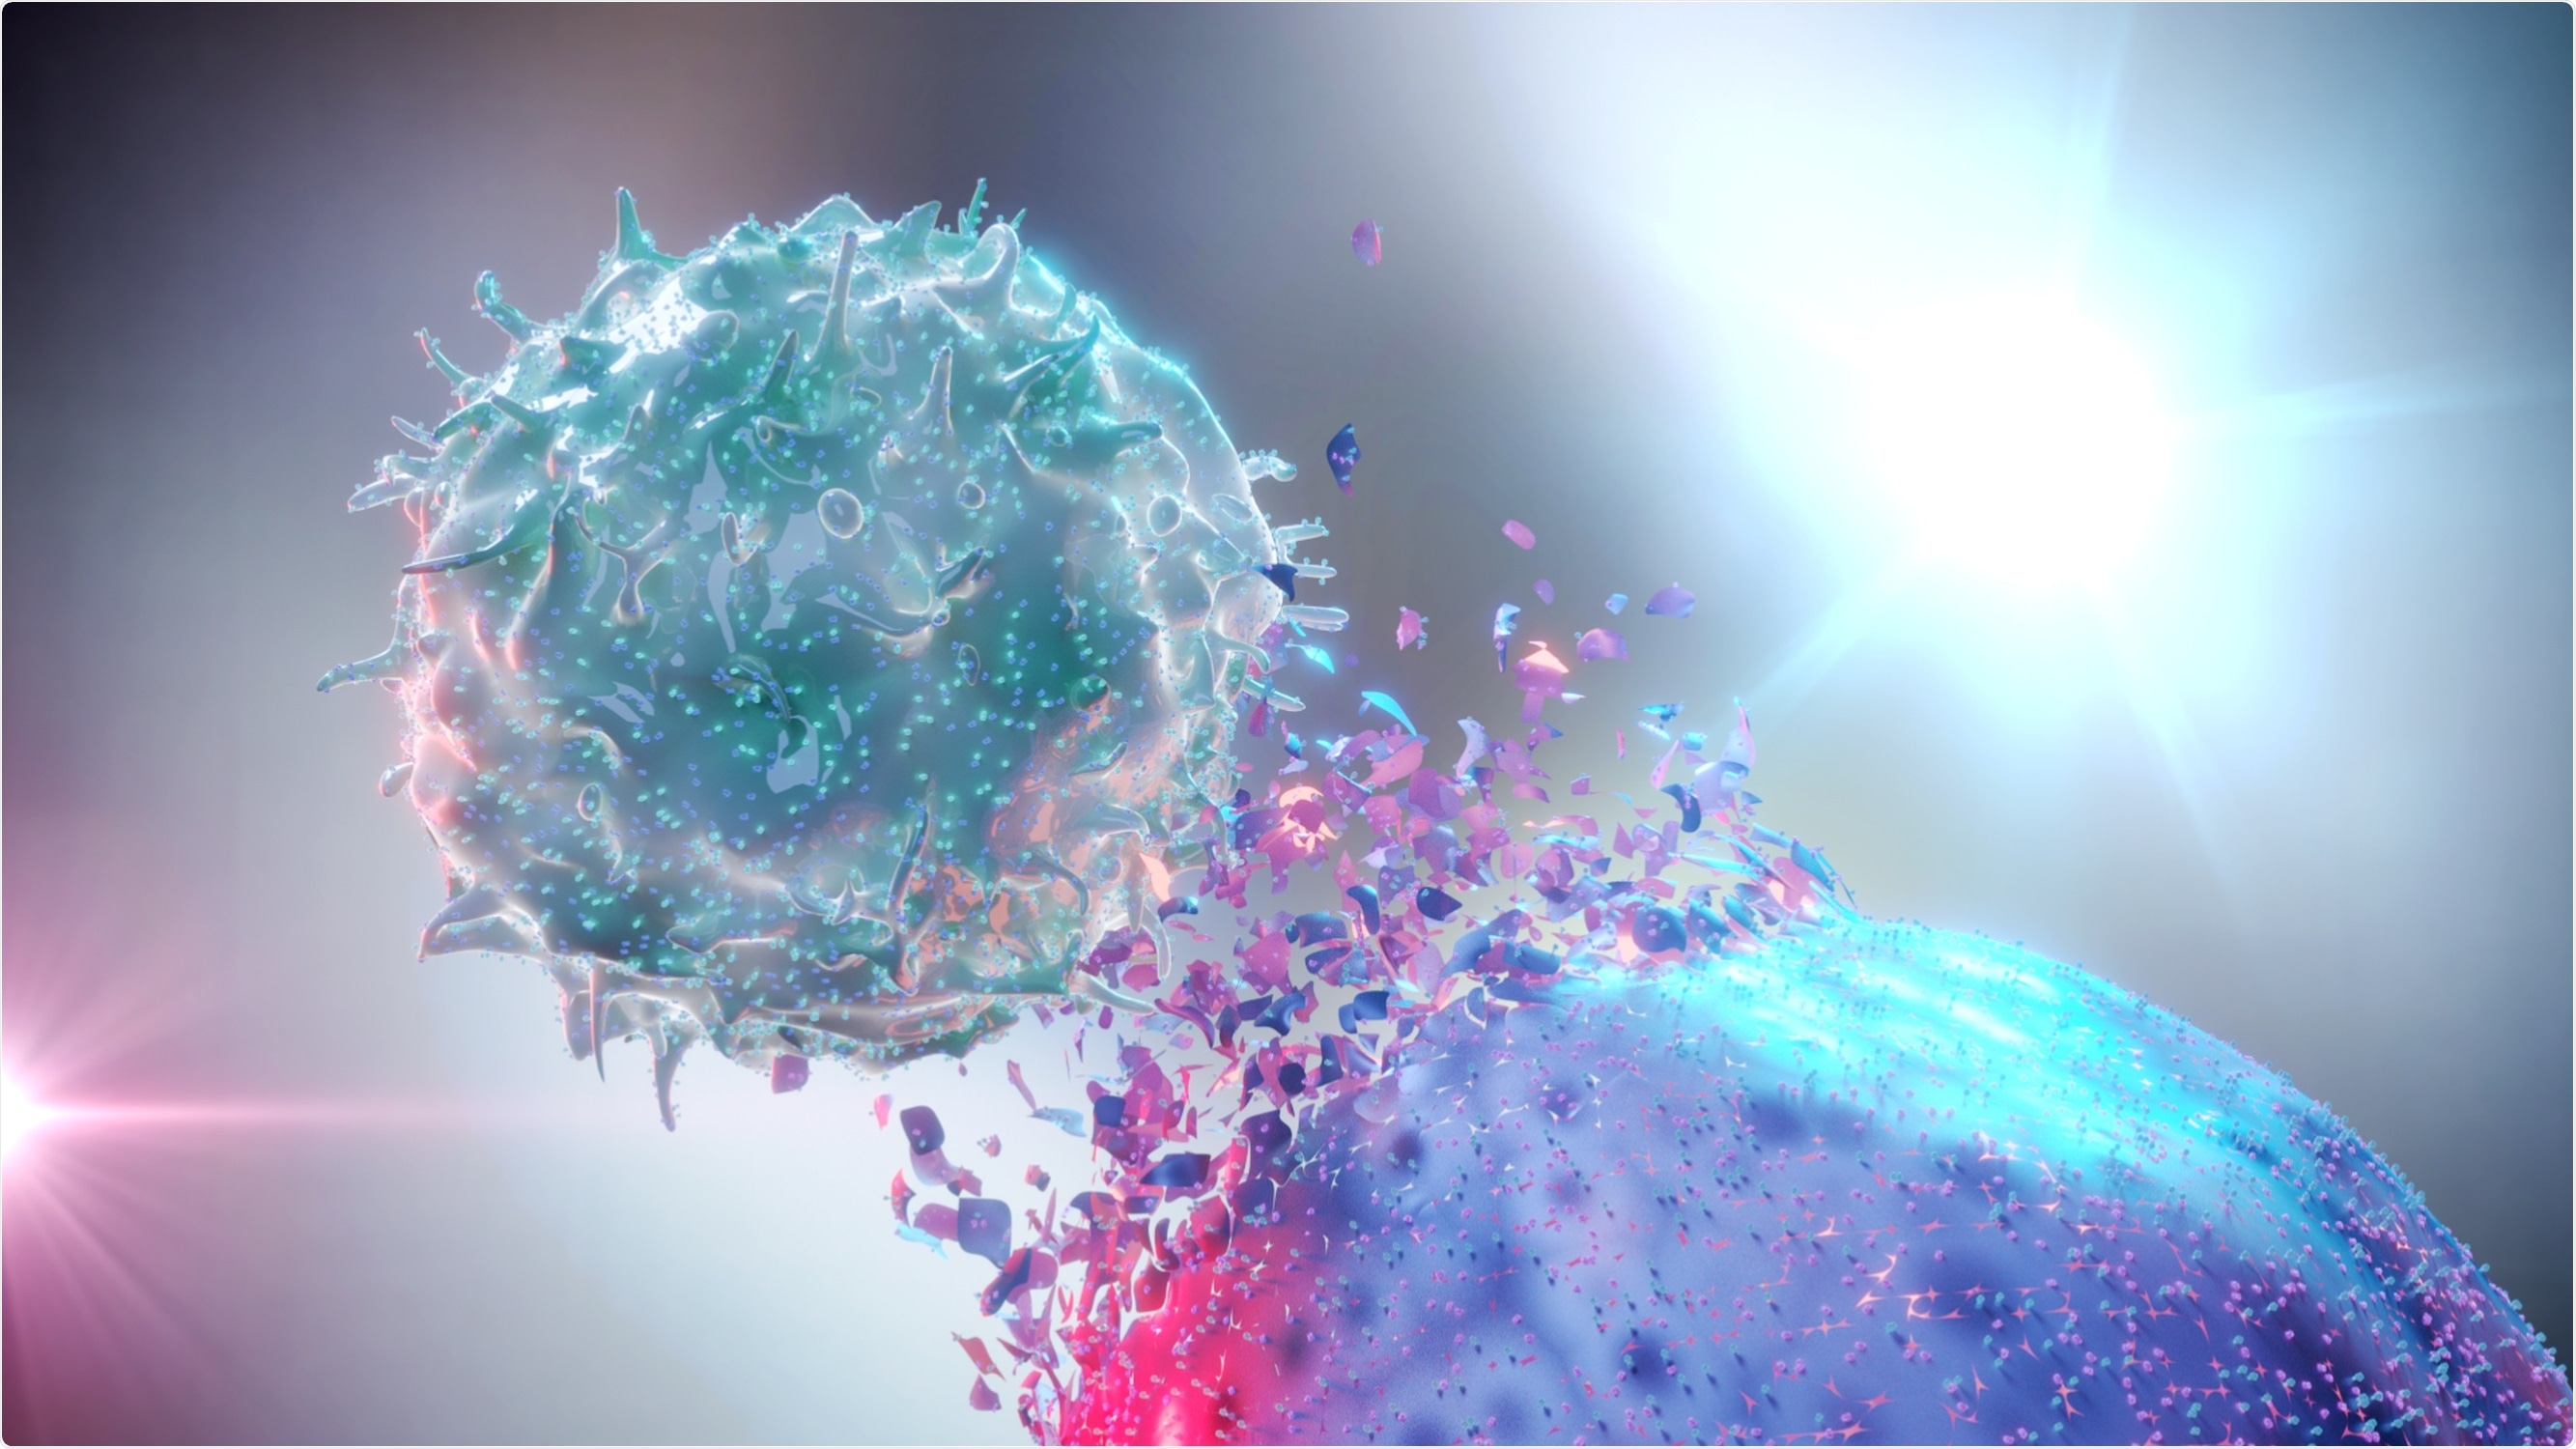 Study: NK and T Cell Immunological Signatures in Hospitalized Patients with COVID-19. Image Credit: Alpha Tauri 3D Graphics / Shutterstock